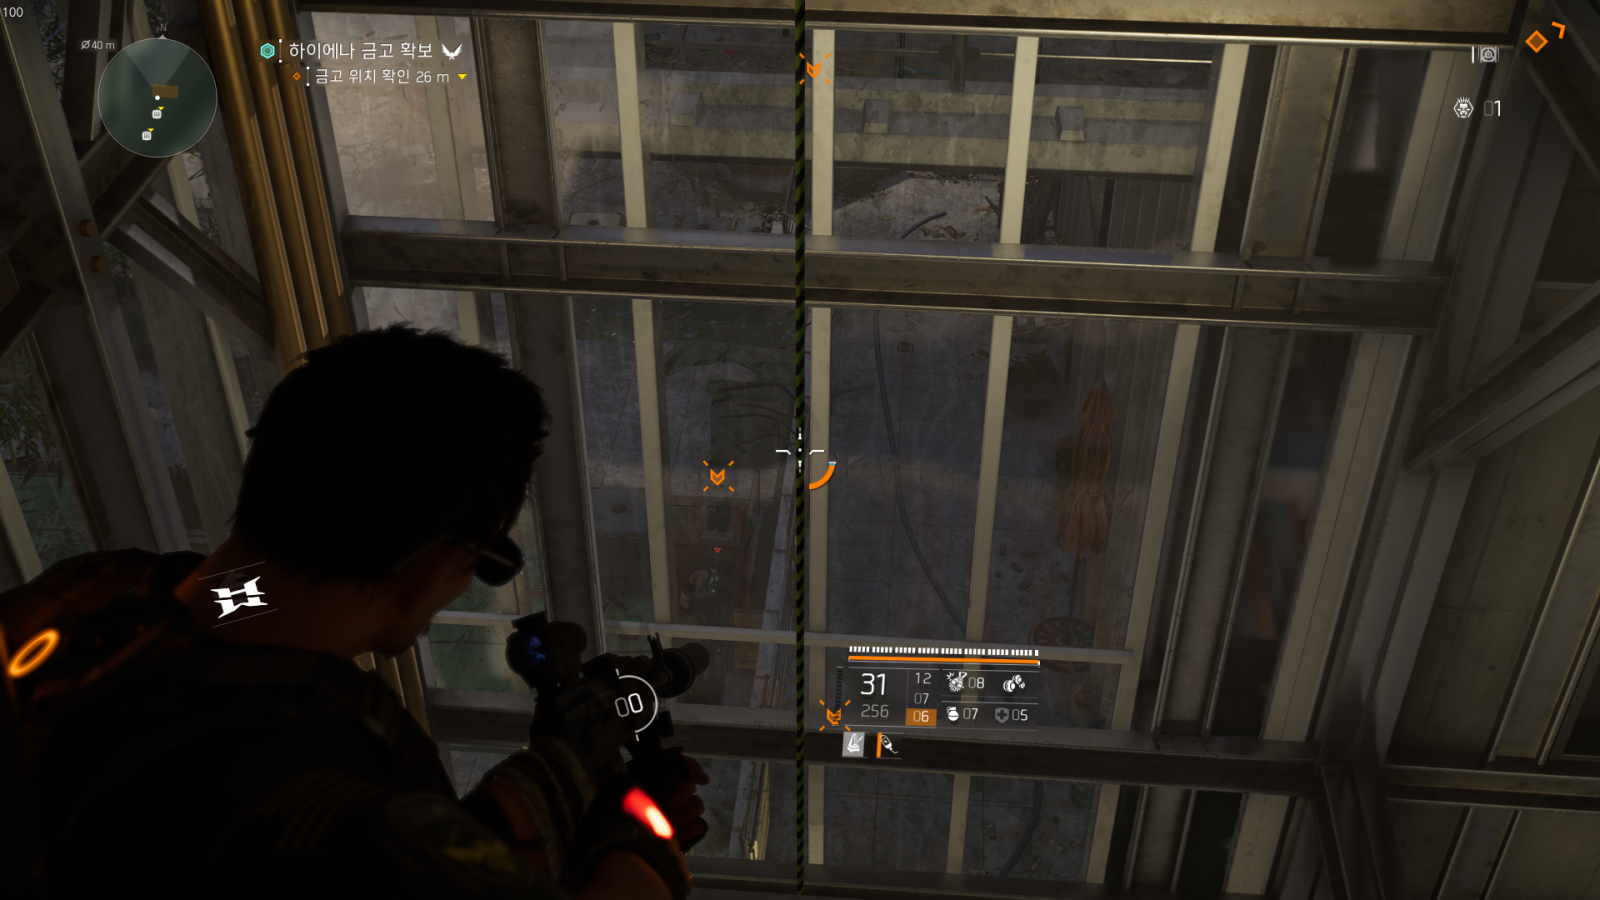 Tom Clancy\'s The Division 2 Screenshot 2020.02.25 - 10.28.51.72.png